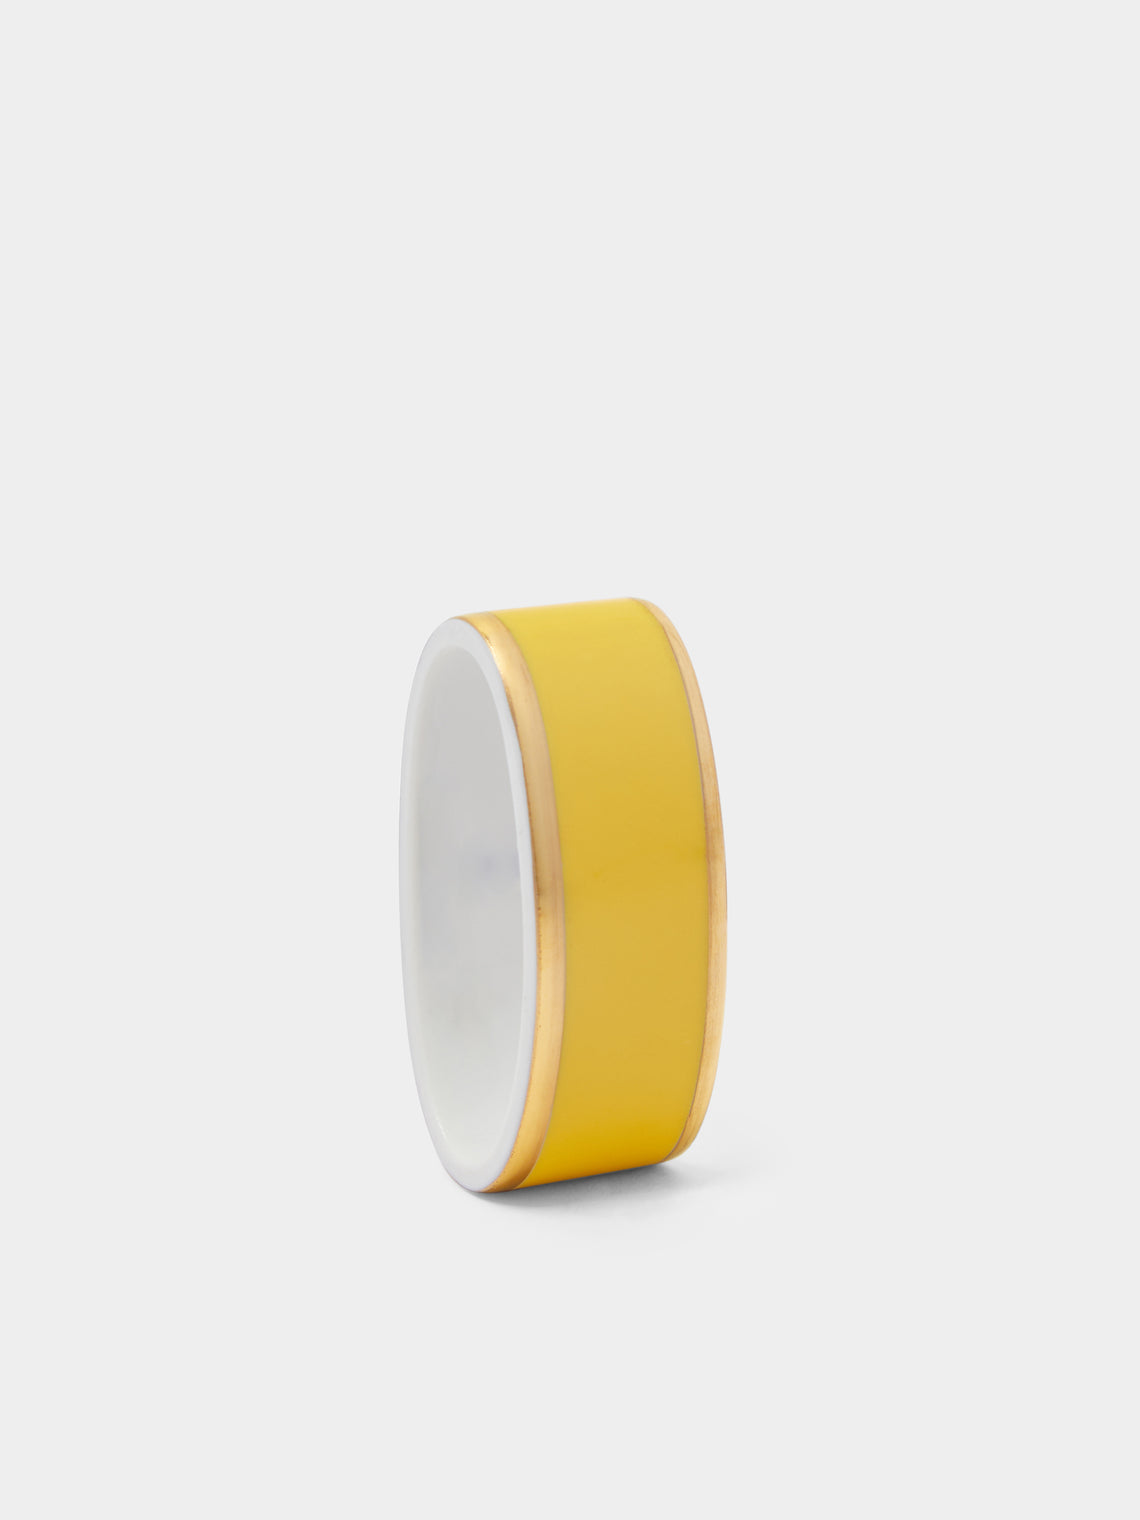 Augarten - Hand-Painted Porcelain Napkin Ring - Yellow - ABASK - 